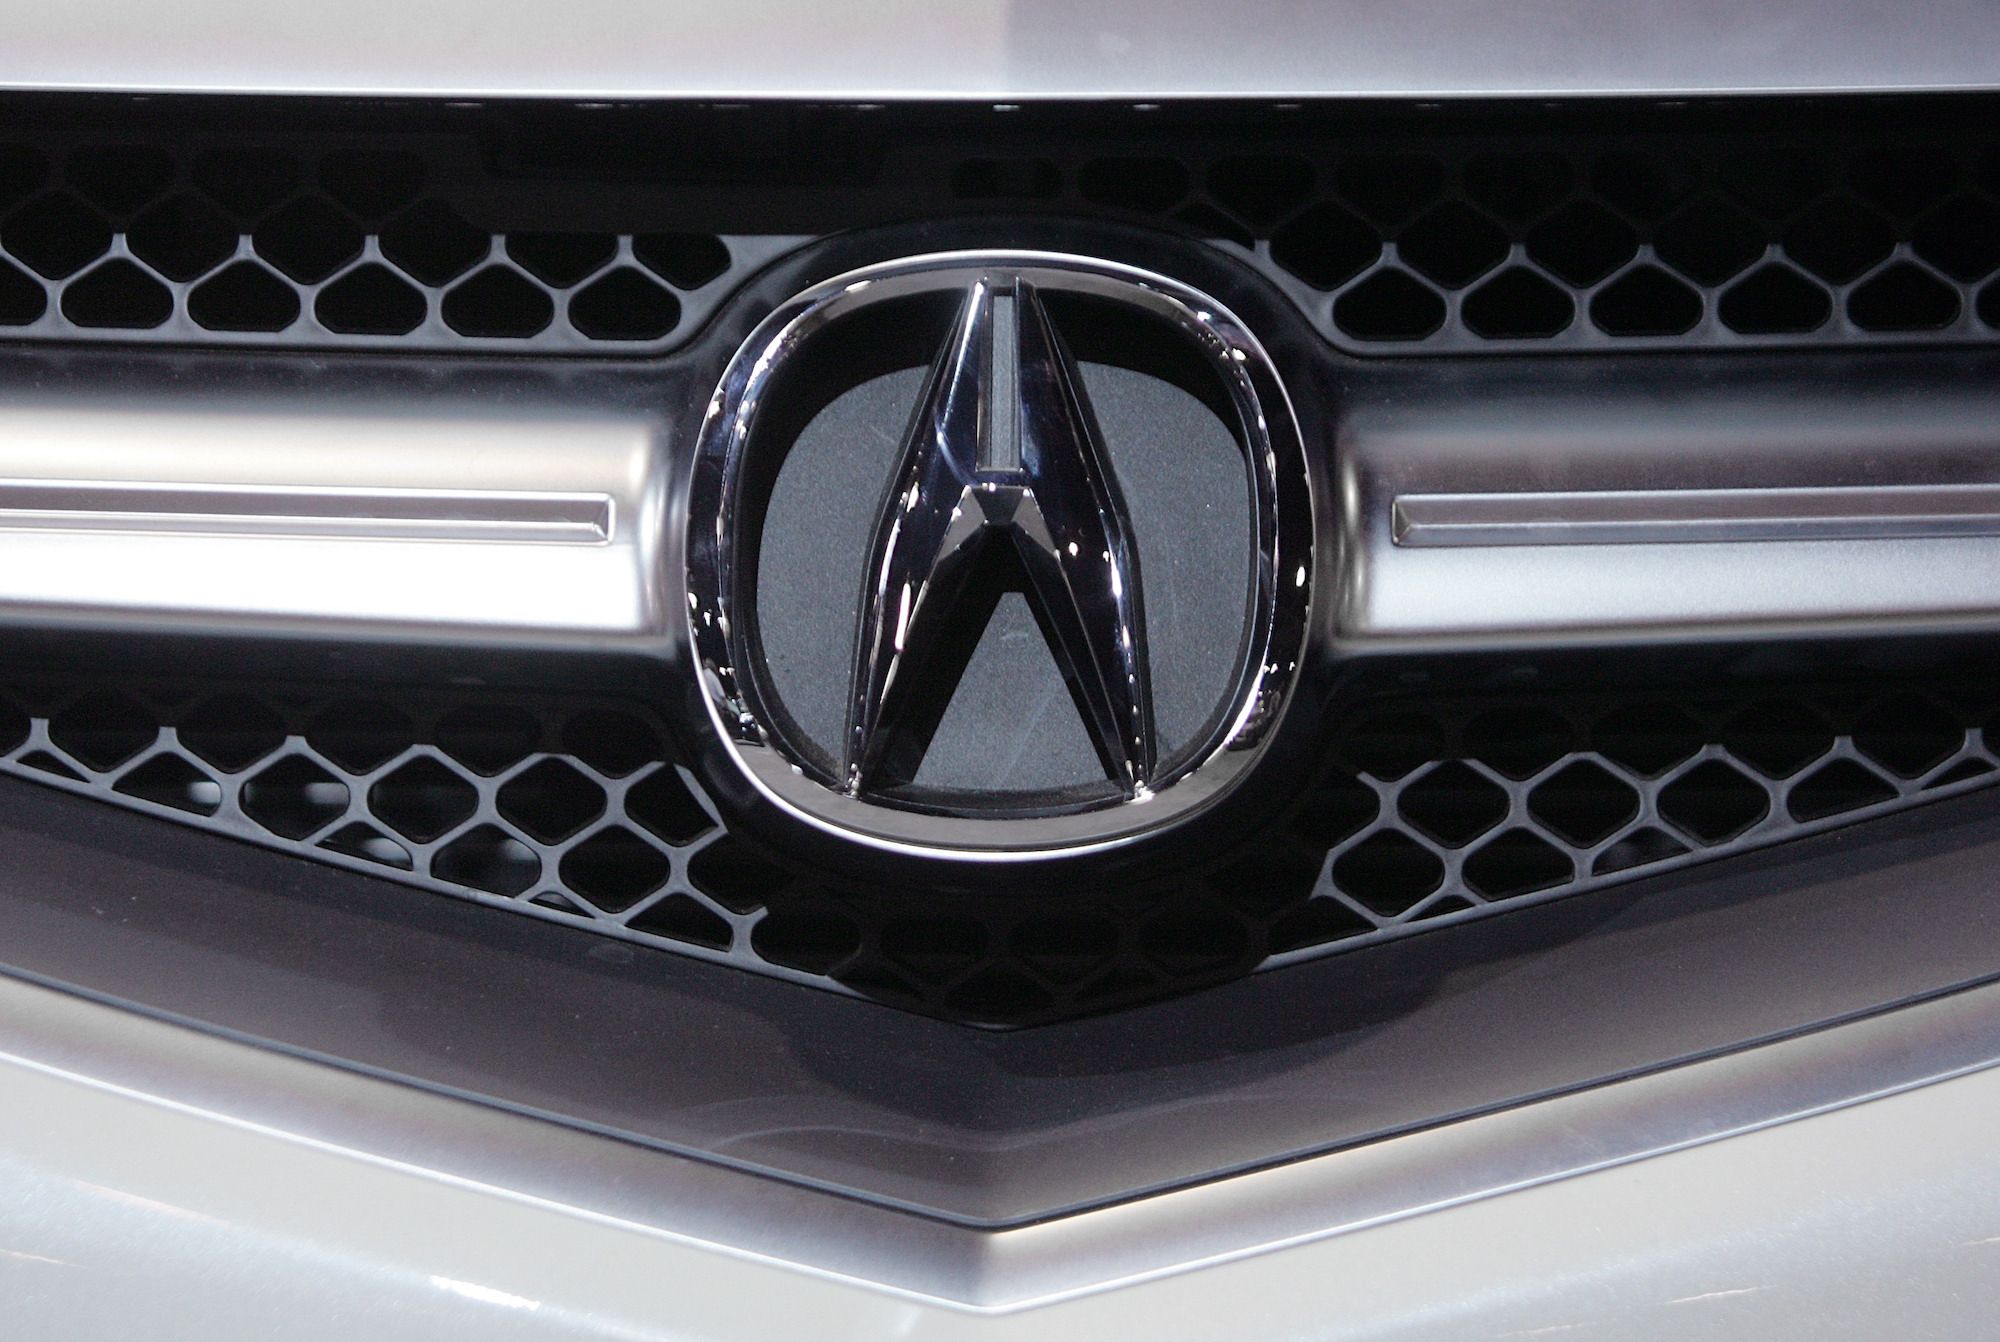 The logo for Japanese automaker Acura can be seen on the grille of a 2007 model displayed at the South Florida International Auto Show in Miami Beach, Florida, on October 14, 2006